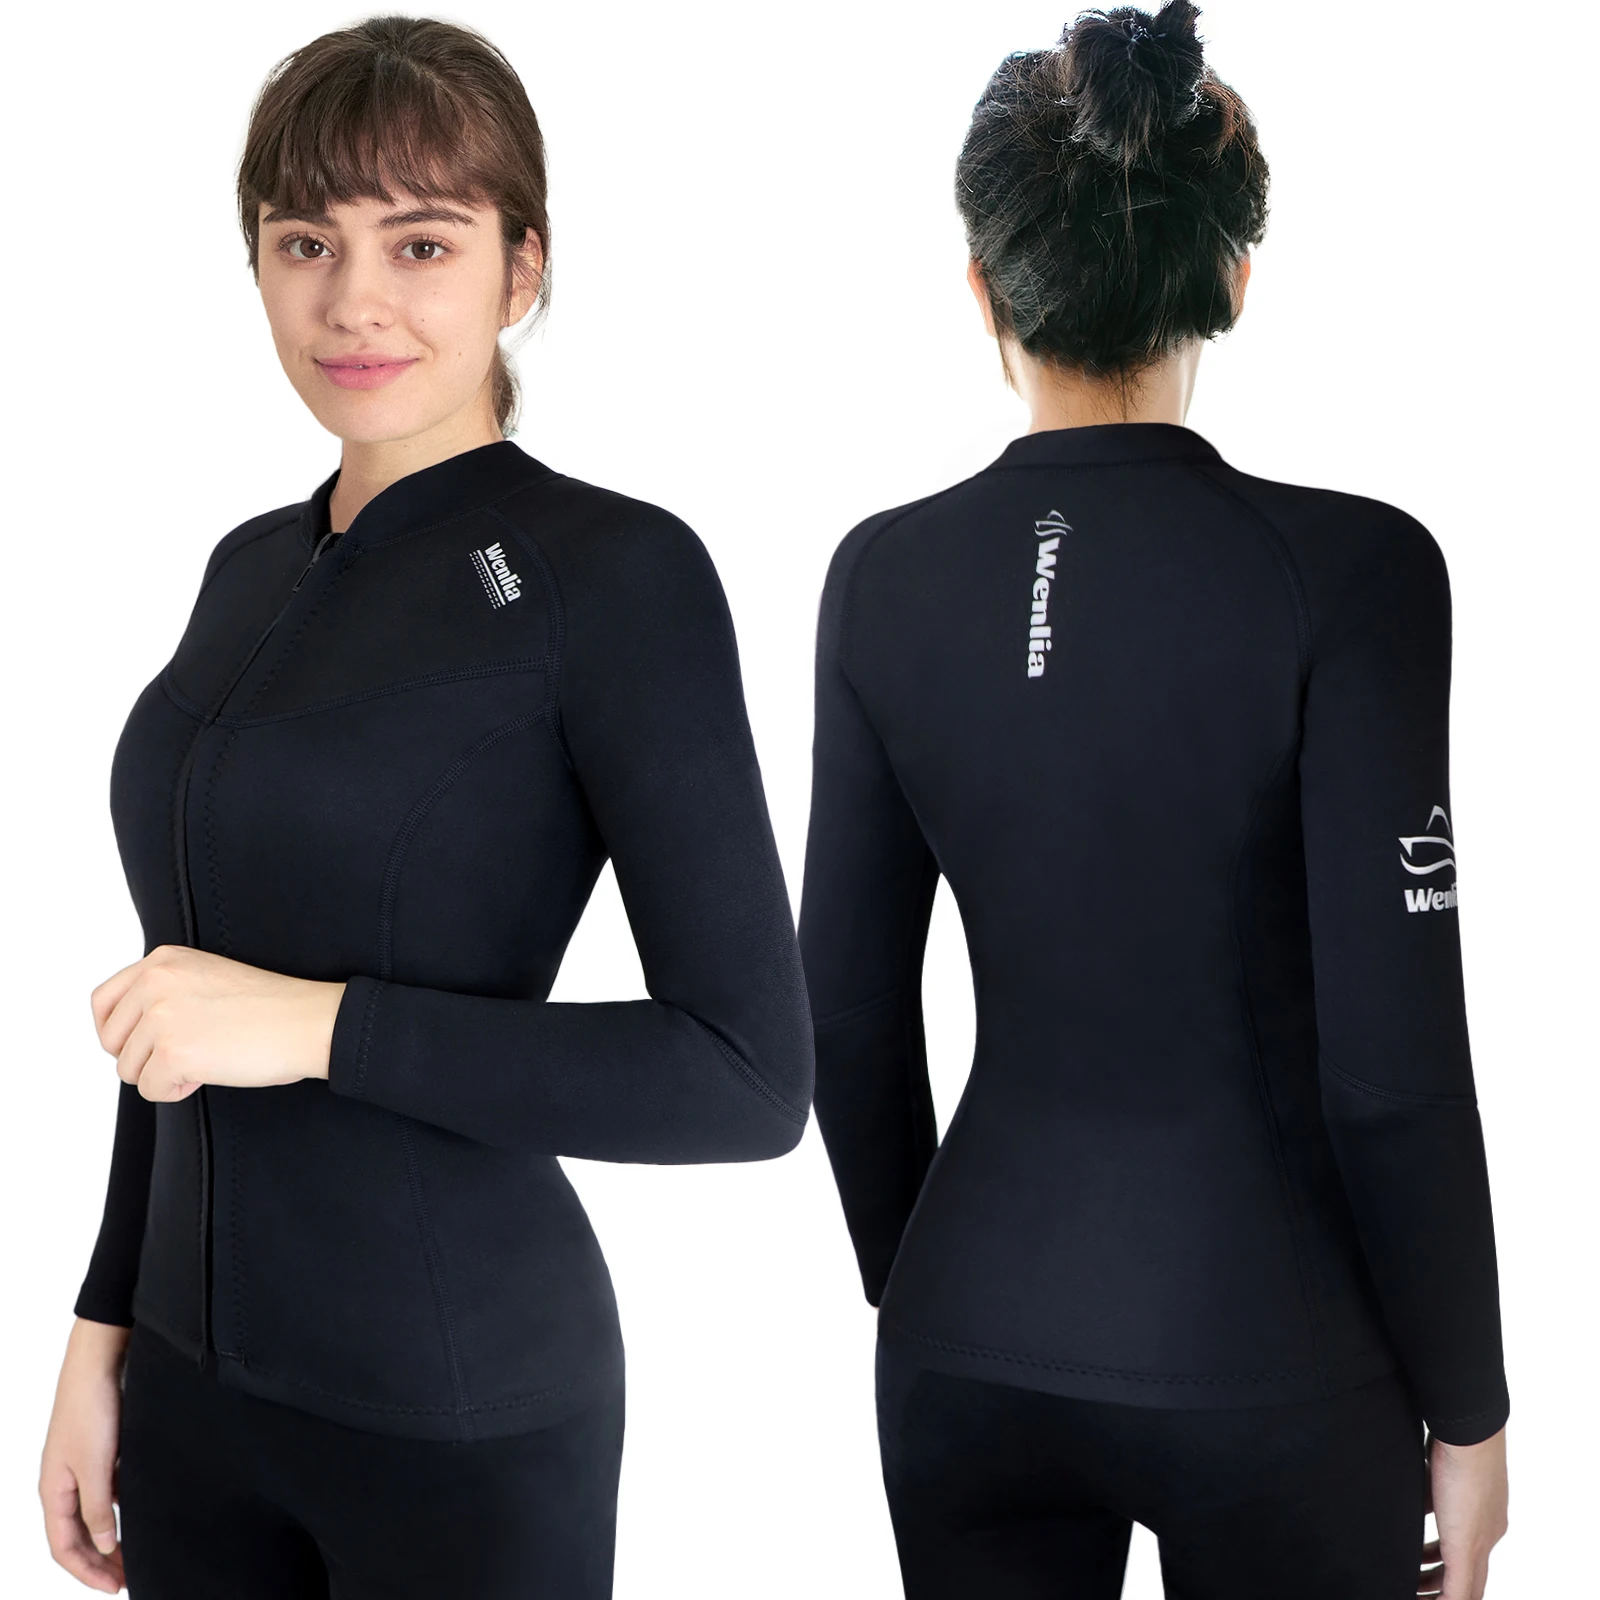 

Front Zipper Women Neoprene Top Diving Jackets Surfing Suit Kayaking Canoeing Long Sleeve Jacket Wetsuits, Blue/accept customize color